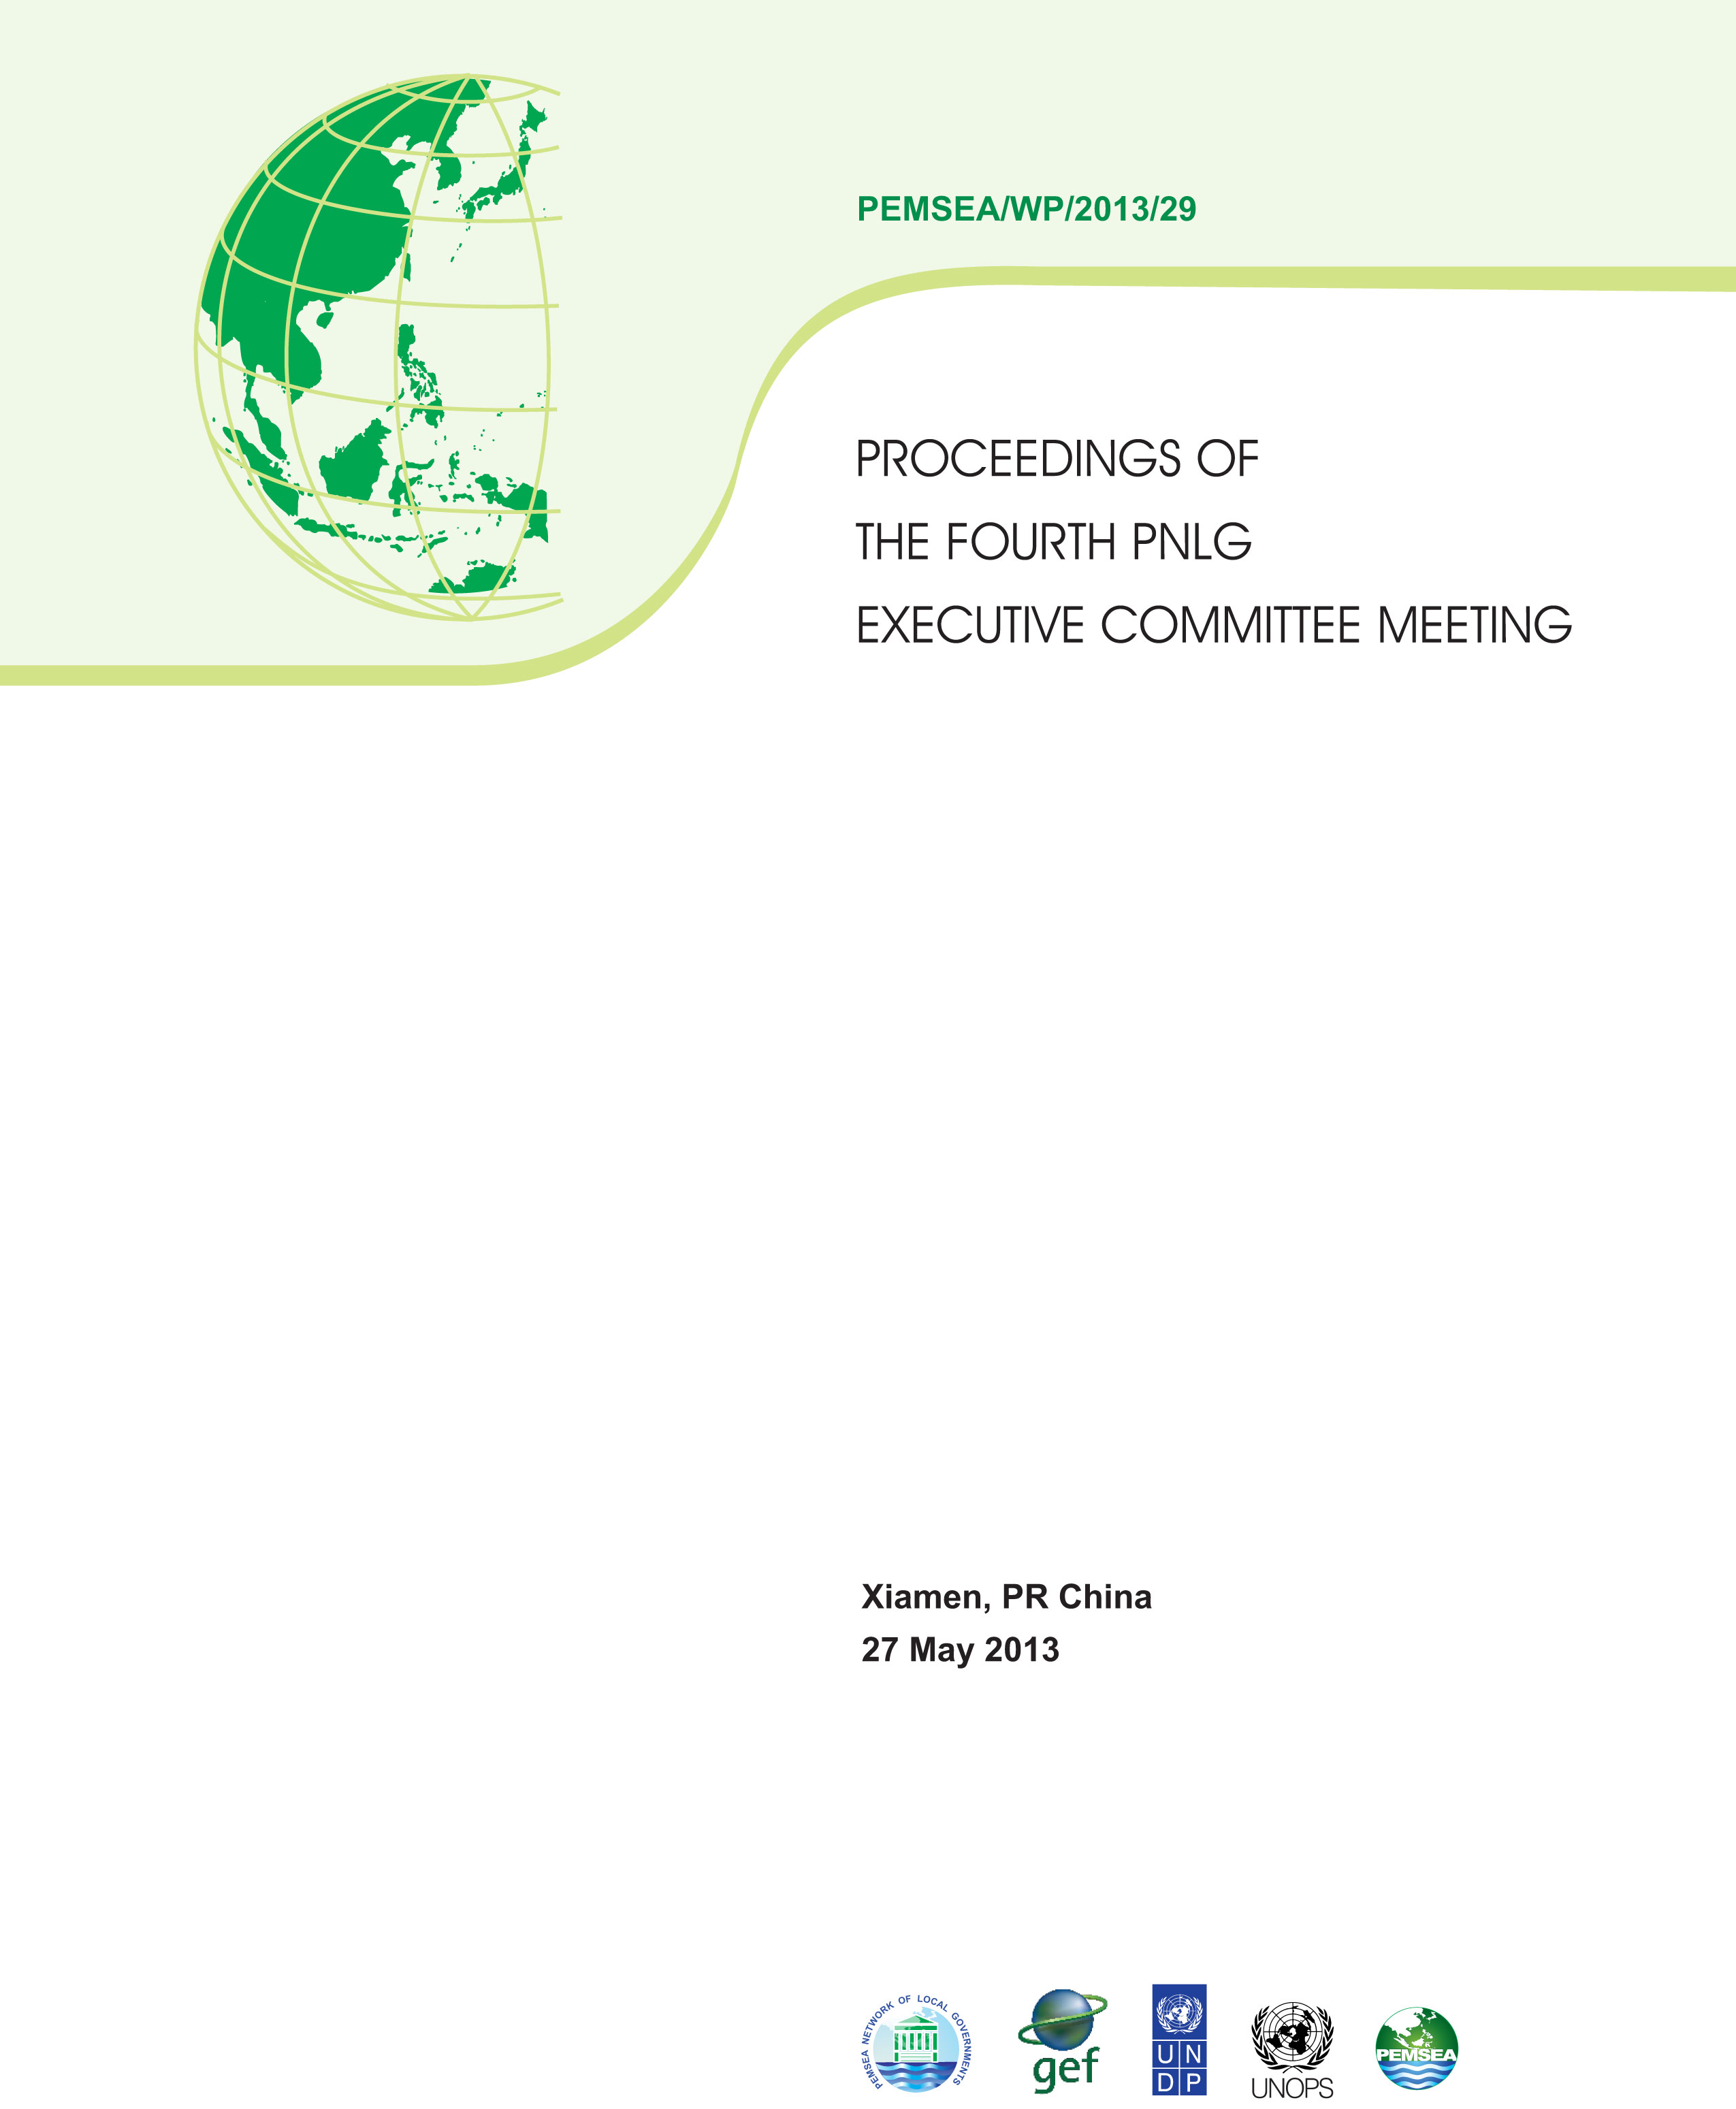 Proceedings of the Fourth PNLG Executive Committee Meeting